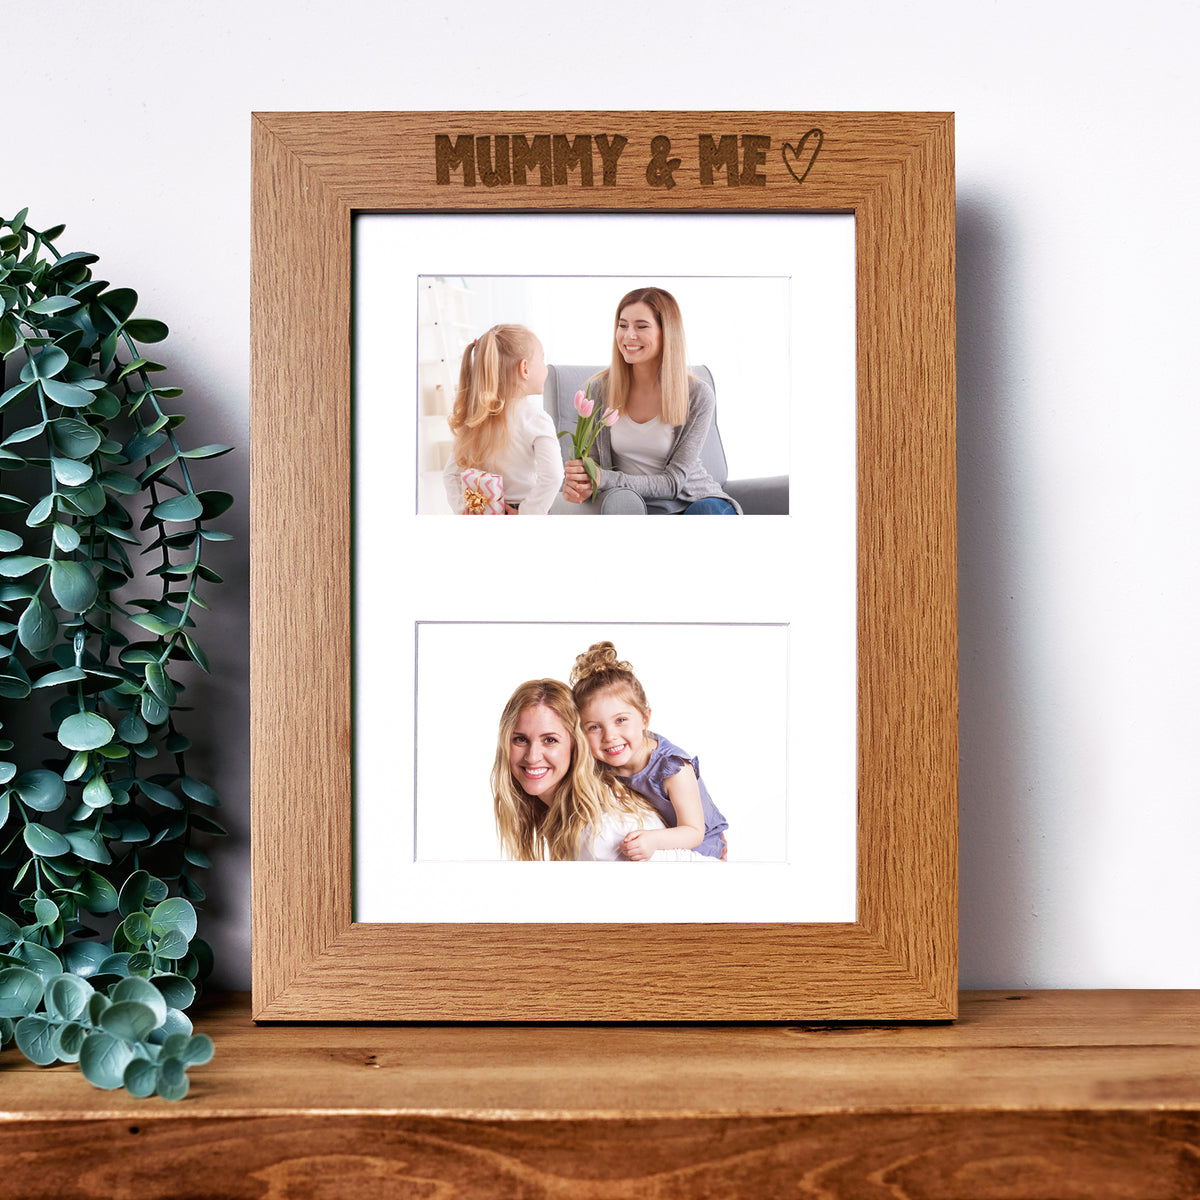 Mummy and Me Photo Picture Frame Double 6x4 Inch Landscape